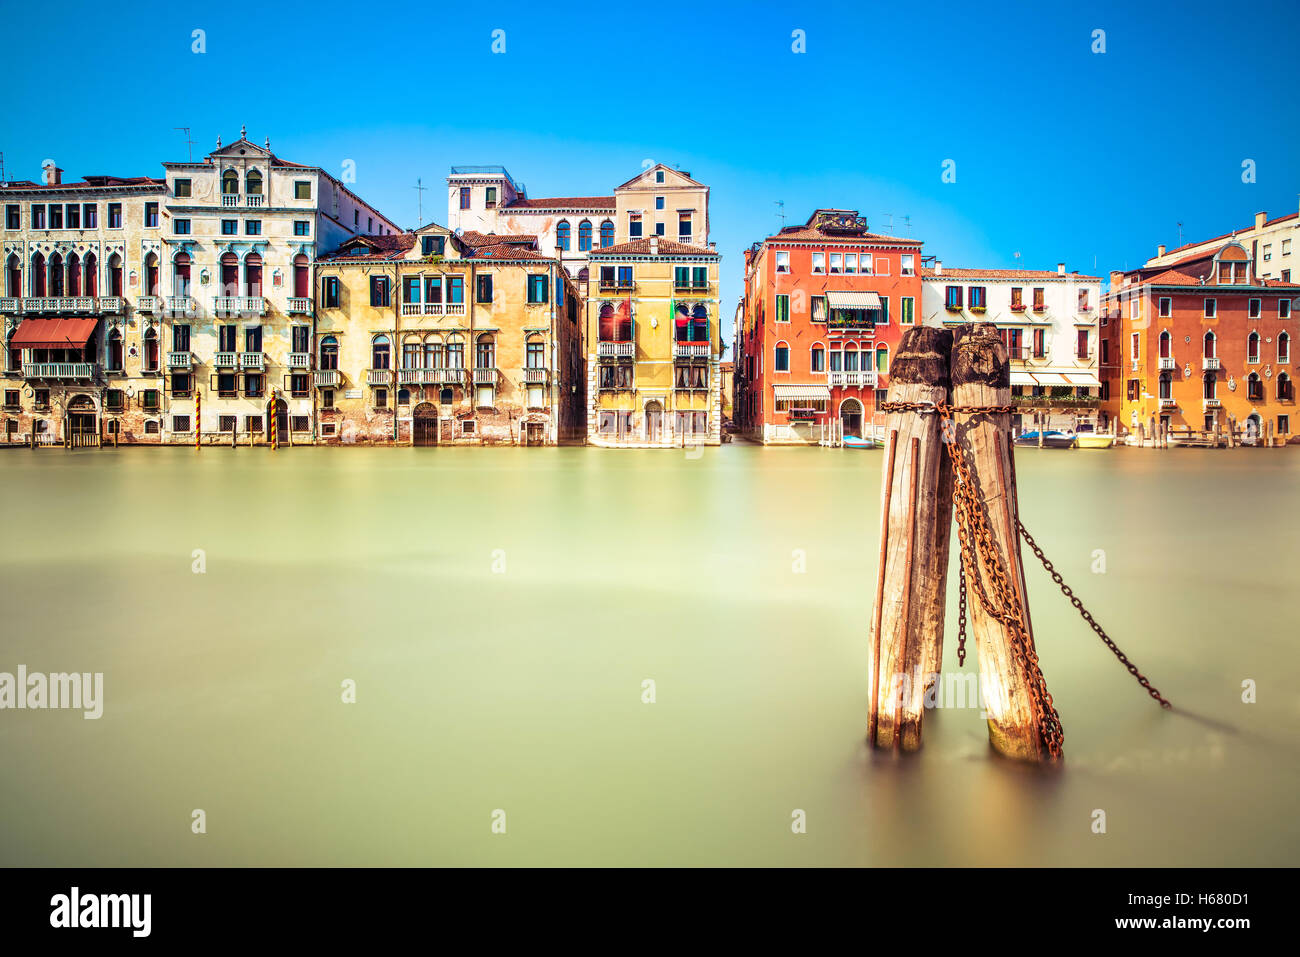 Venice cityscape, water grand canal and traditional buildings facade. Italy, Europe. Long exposure photography. Stock Photo